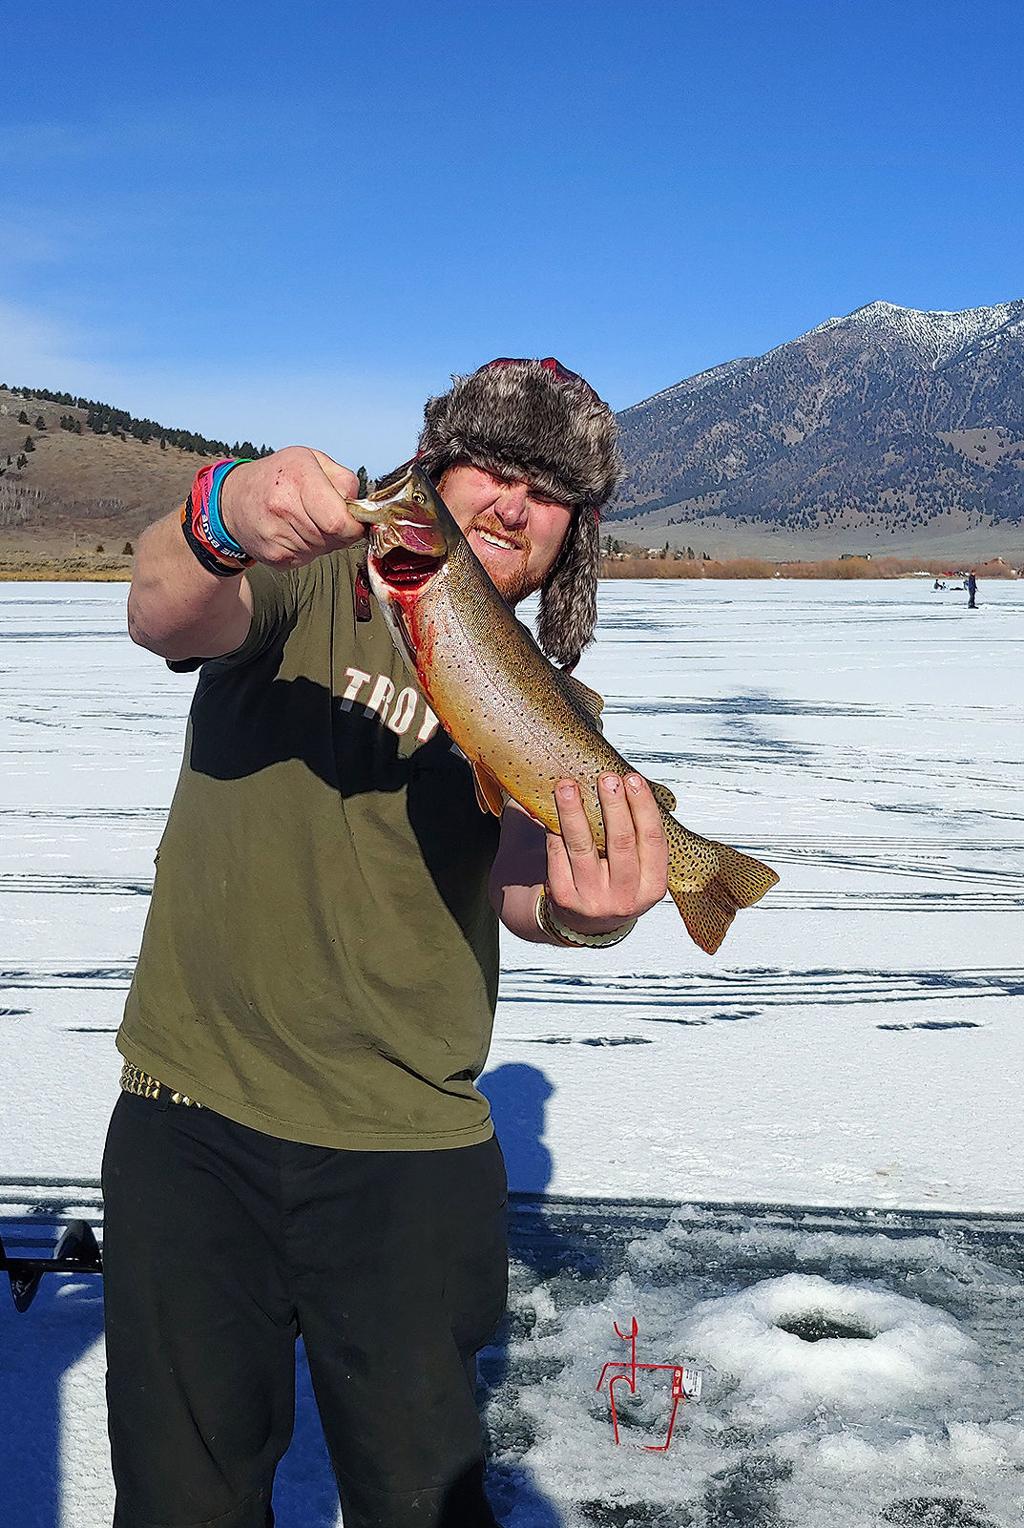 Off to a hot start: Ice fishers rush Henry's Lake for early ice